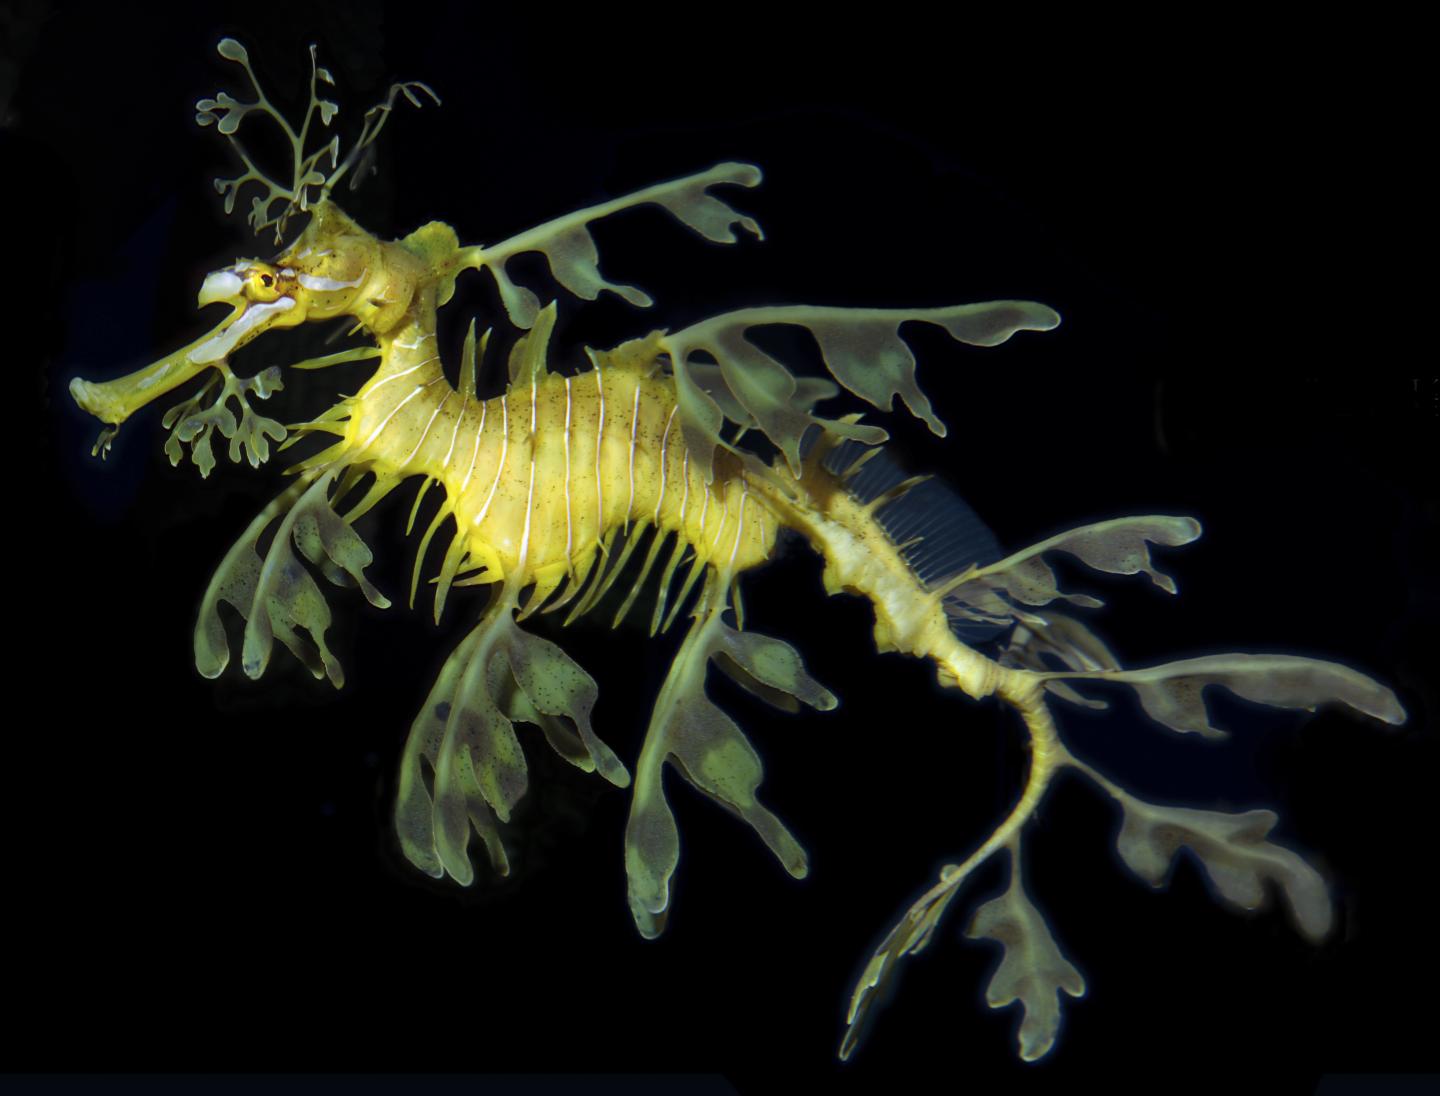 Leafy Sea Dragons May Lose Their Home